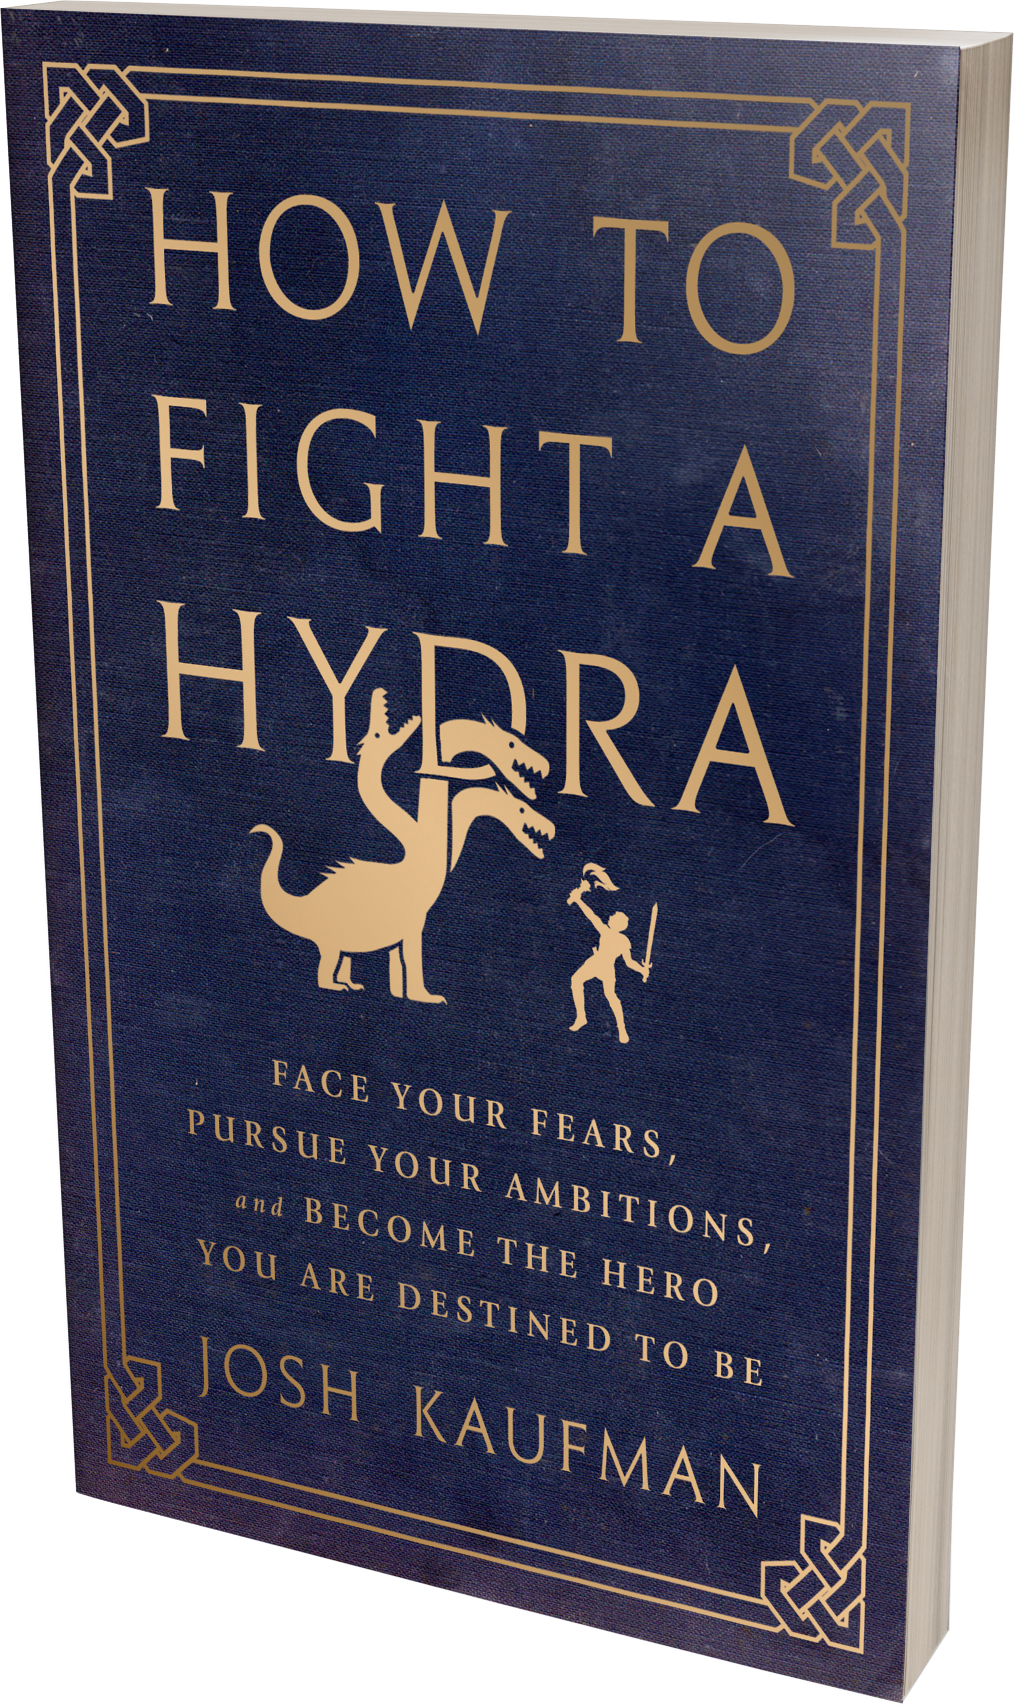 Howto Fighta Hydra Book Cover PNG image